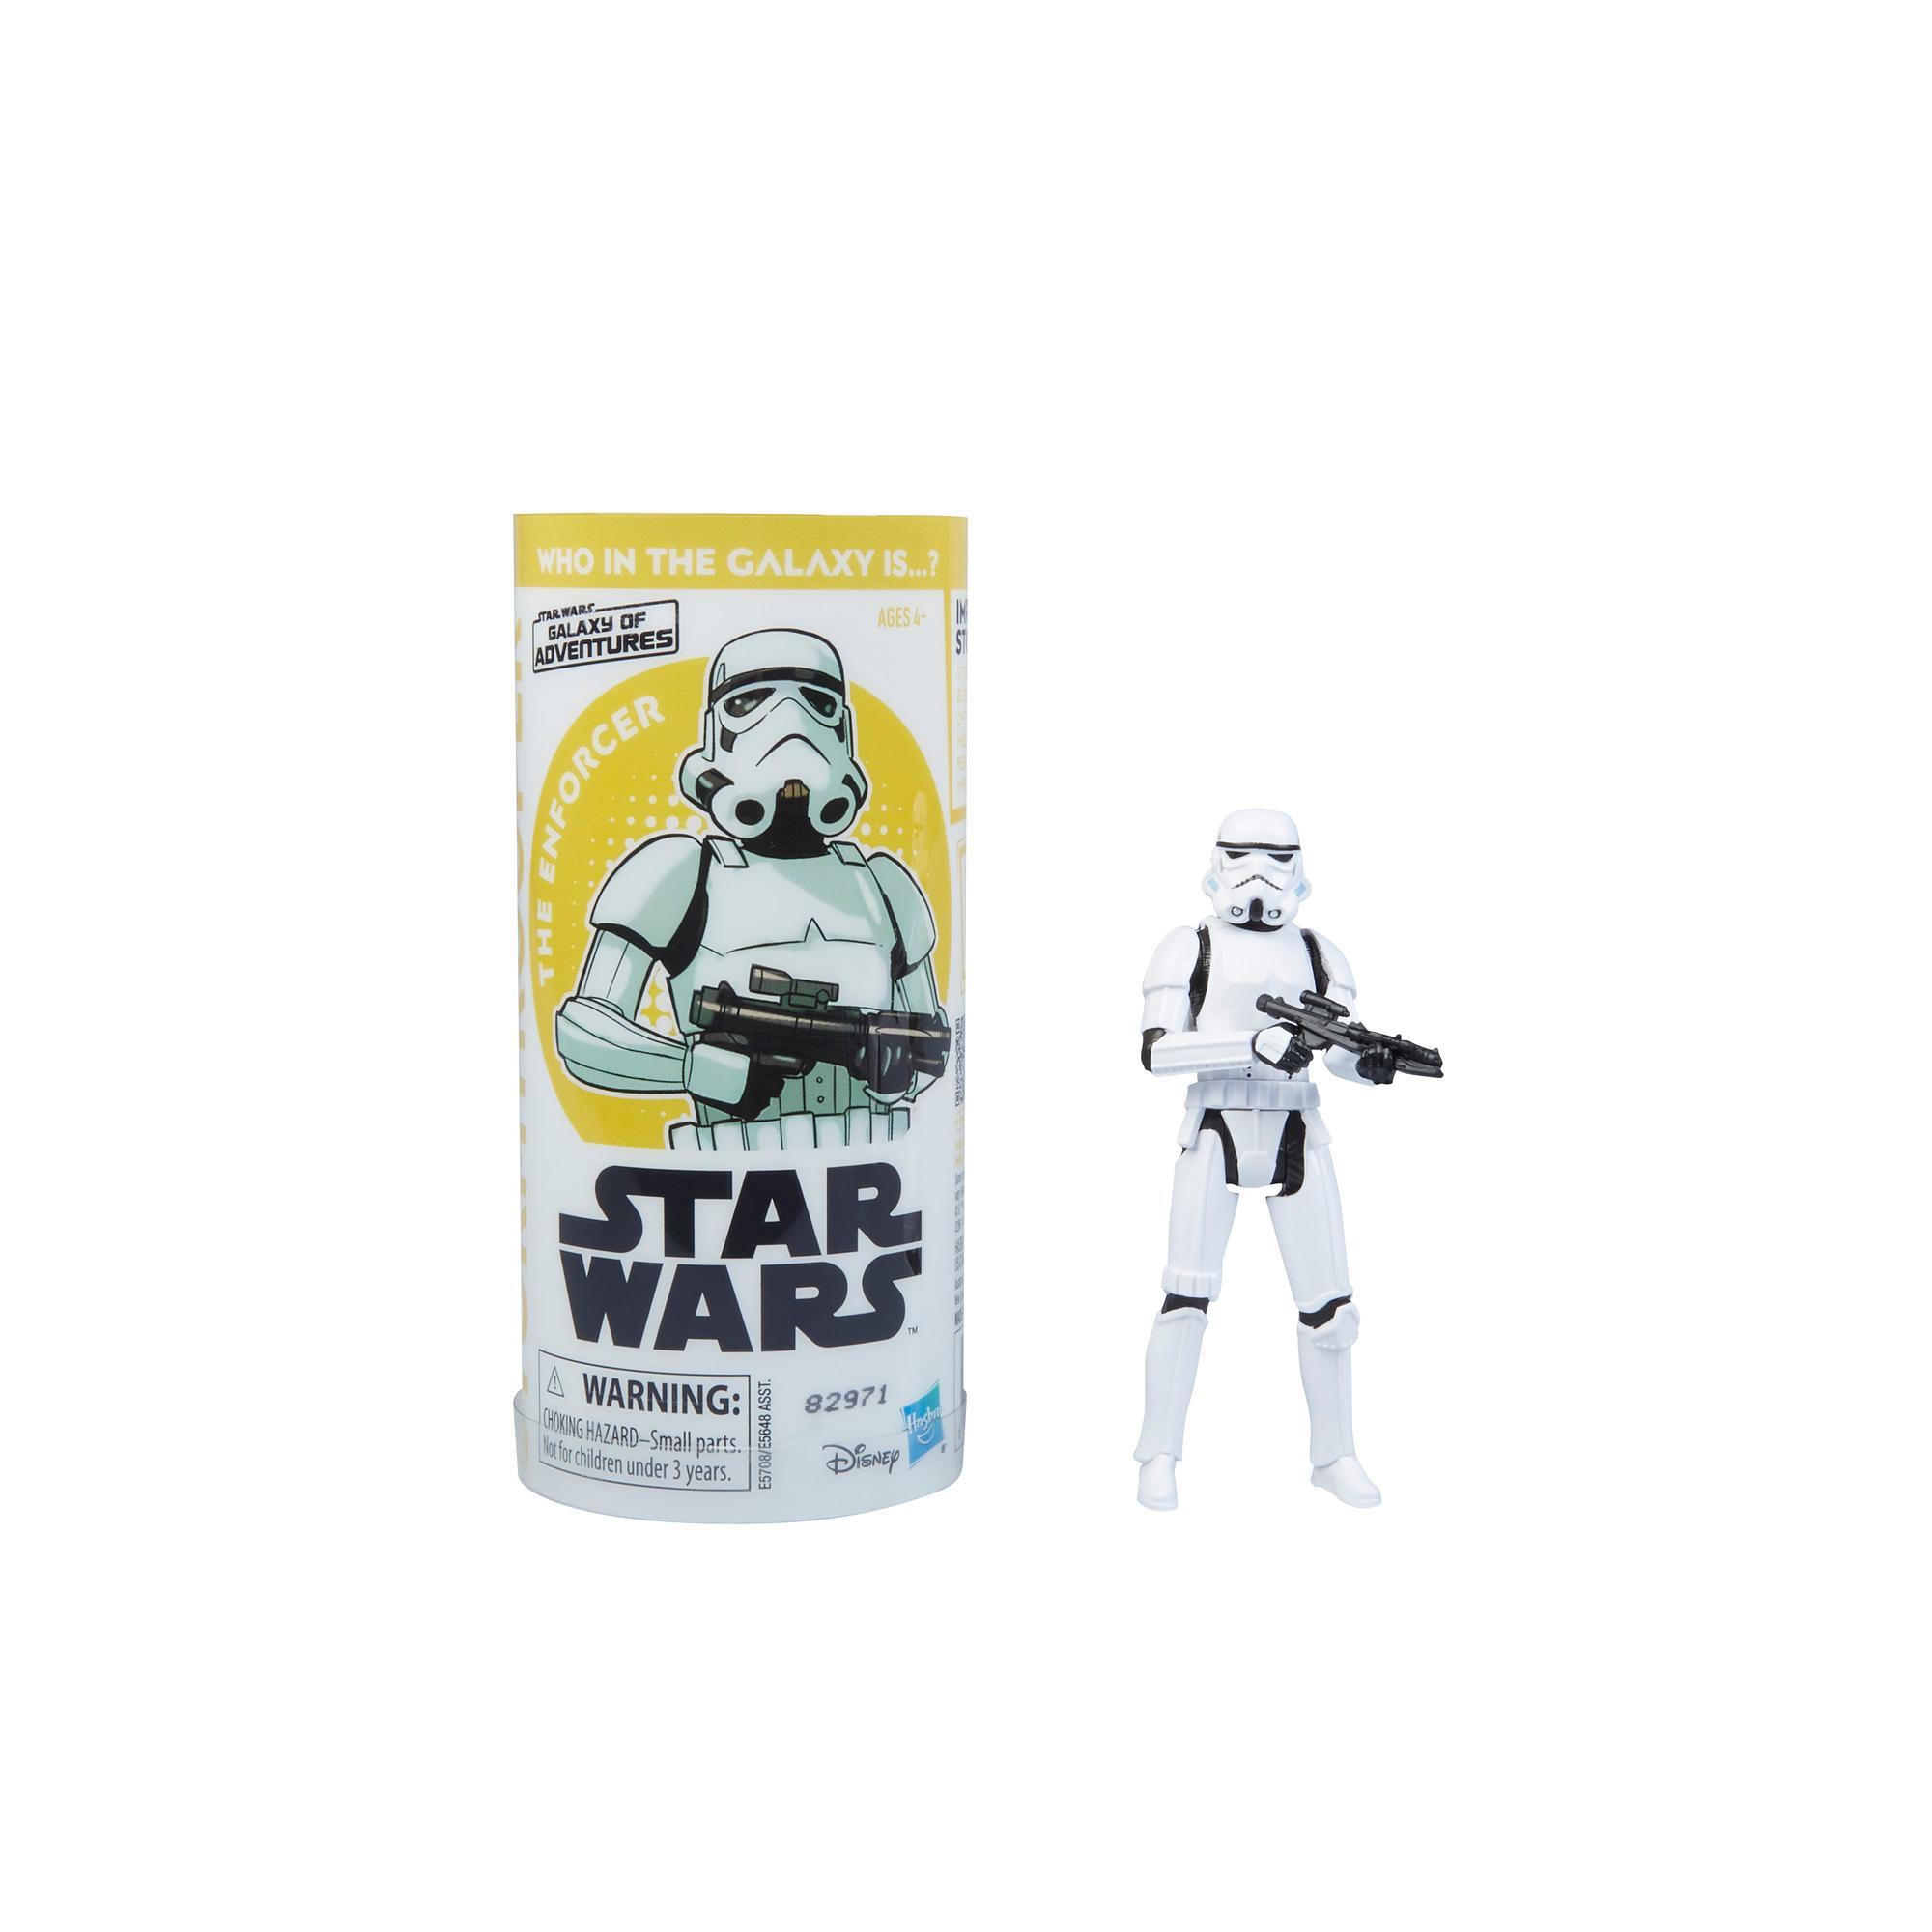 Star Wars Galaxy of Adventures Imperial Stormtrooper Figure and Mini Comic product thumbnail 1